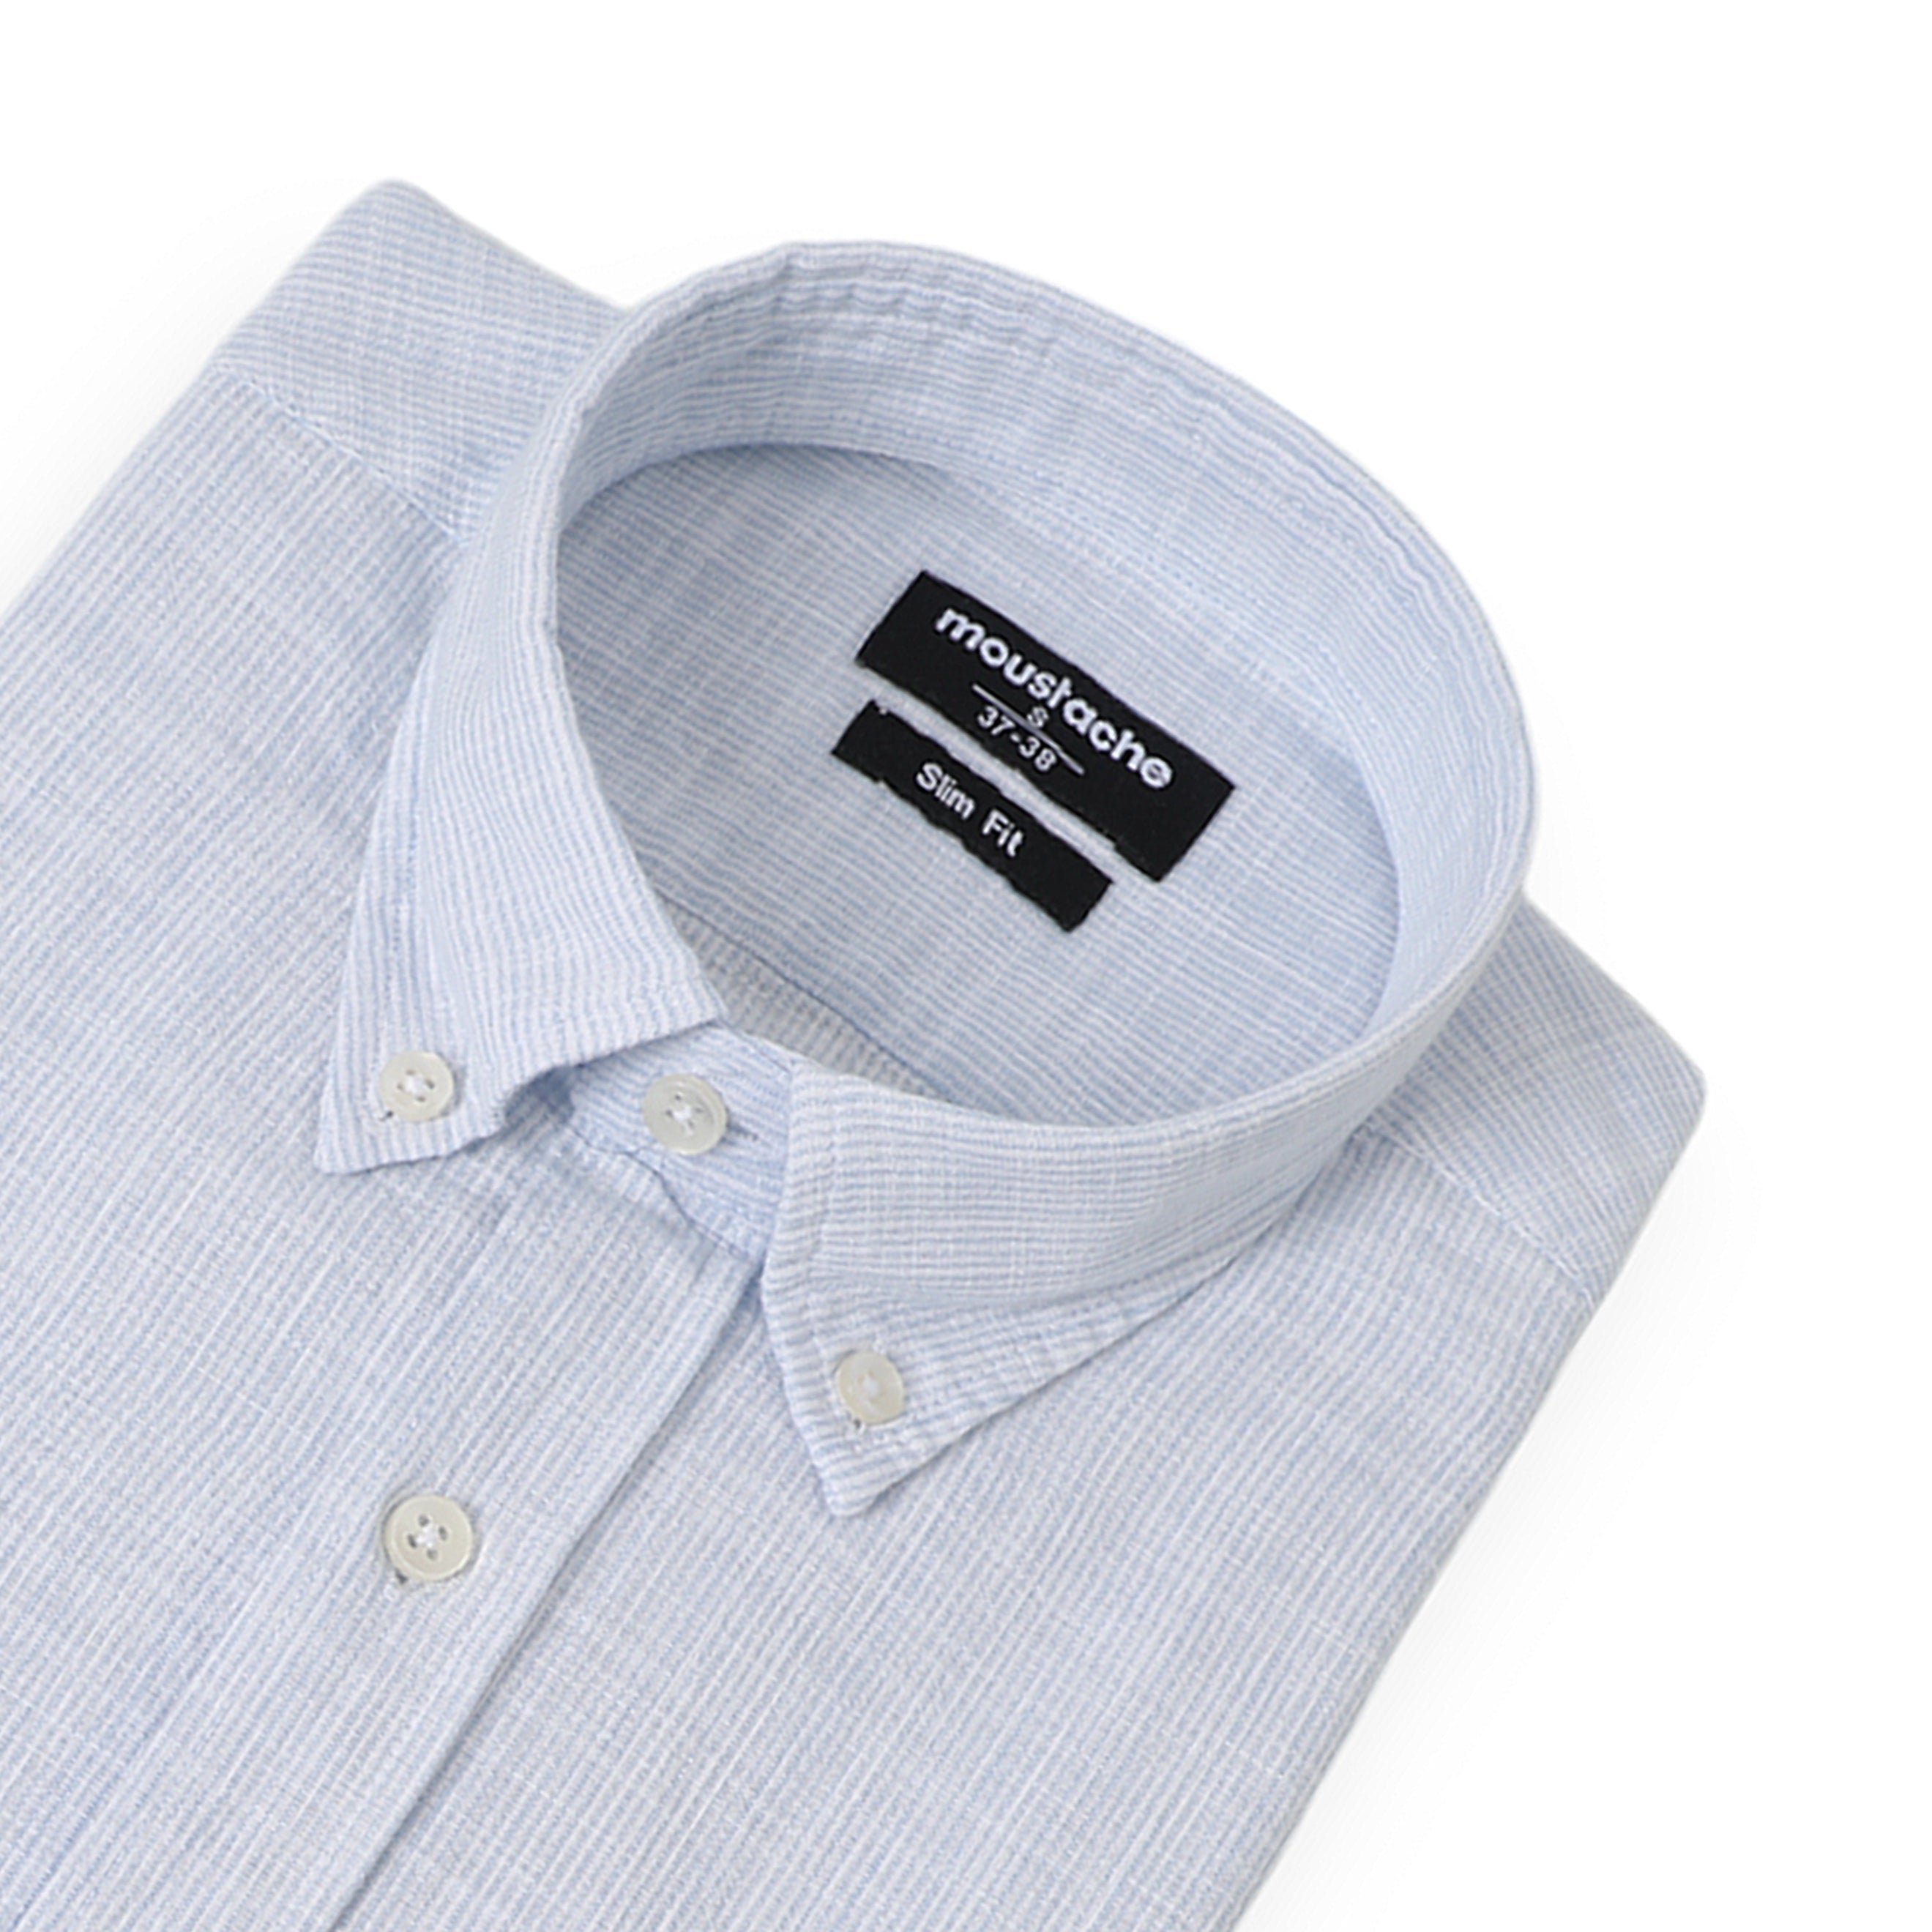 Men Blue Classic Slim Fit Shirt With Side Pockets